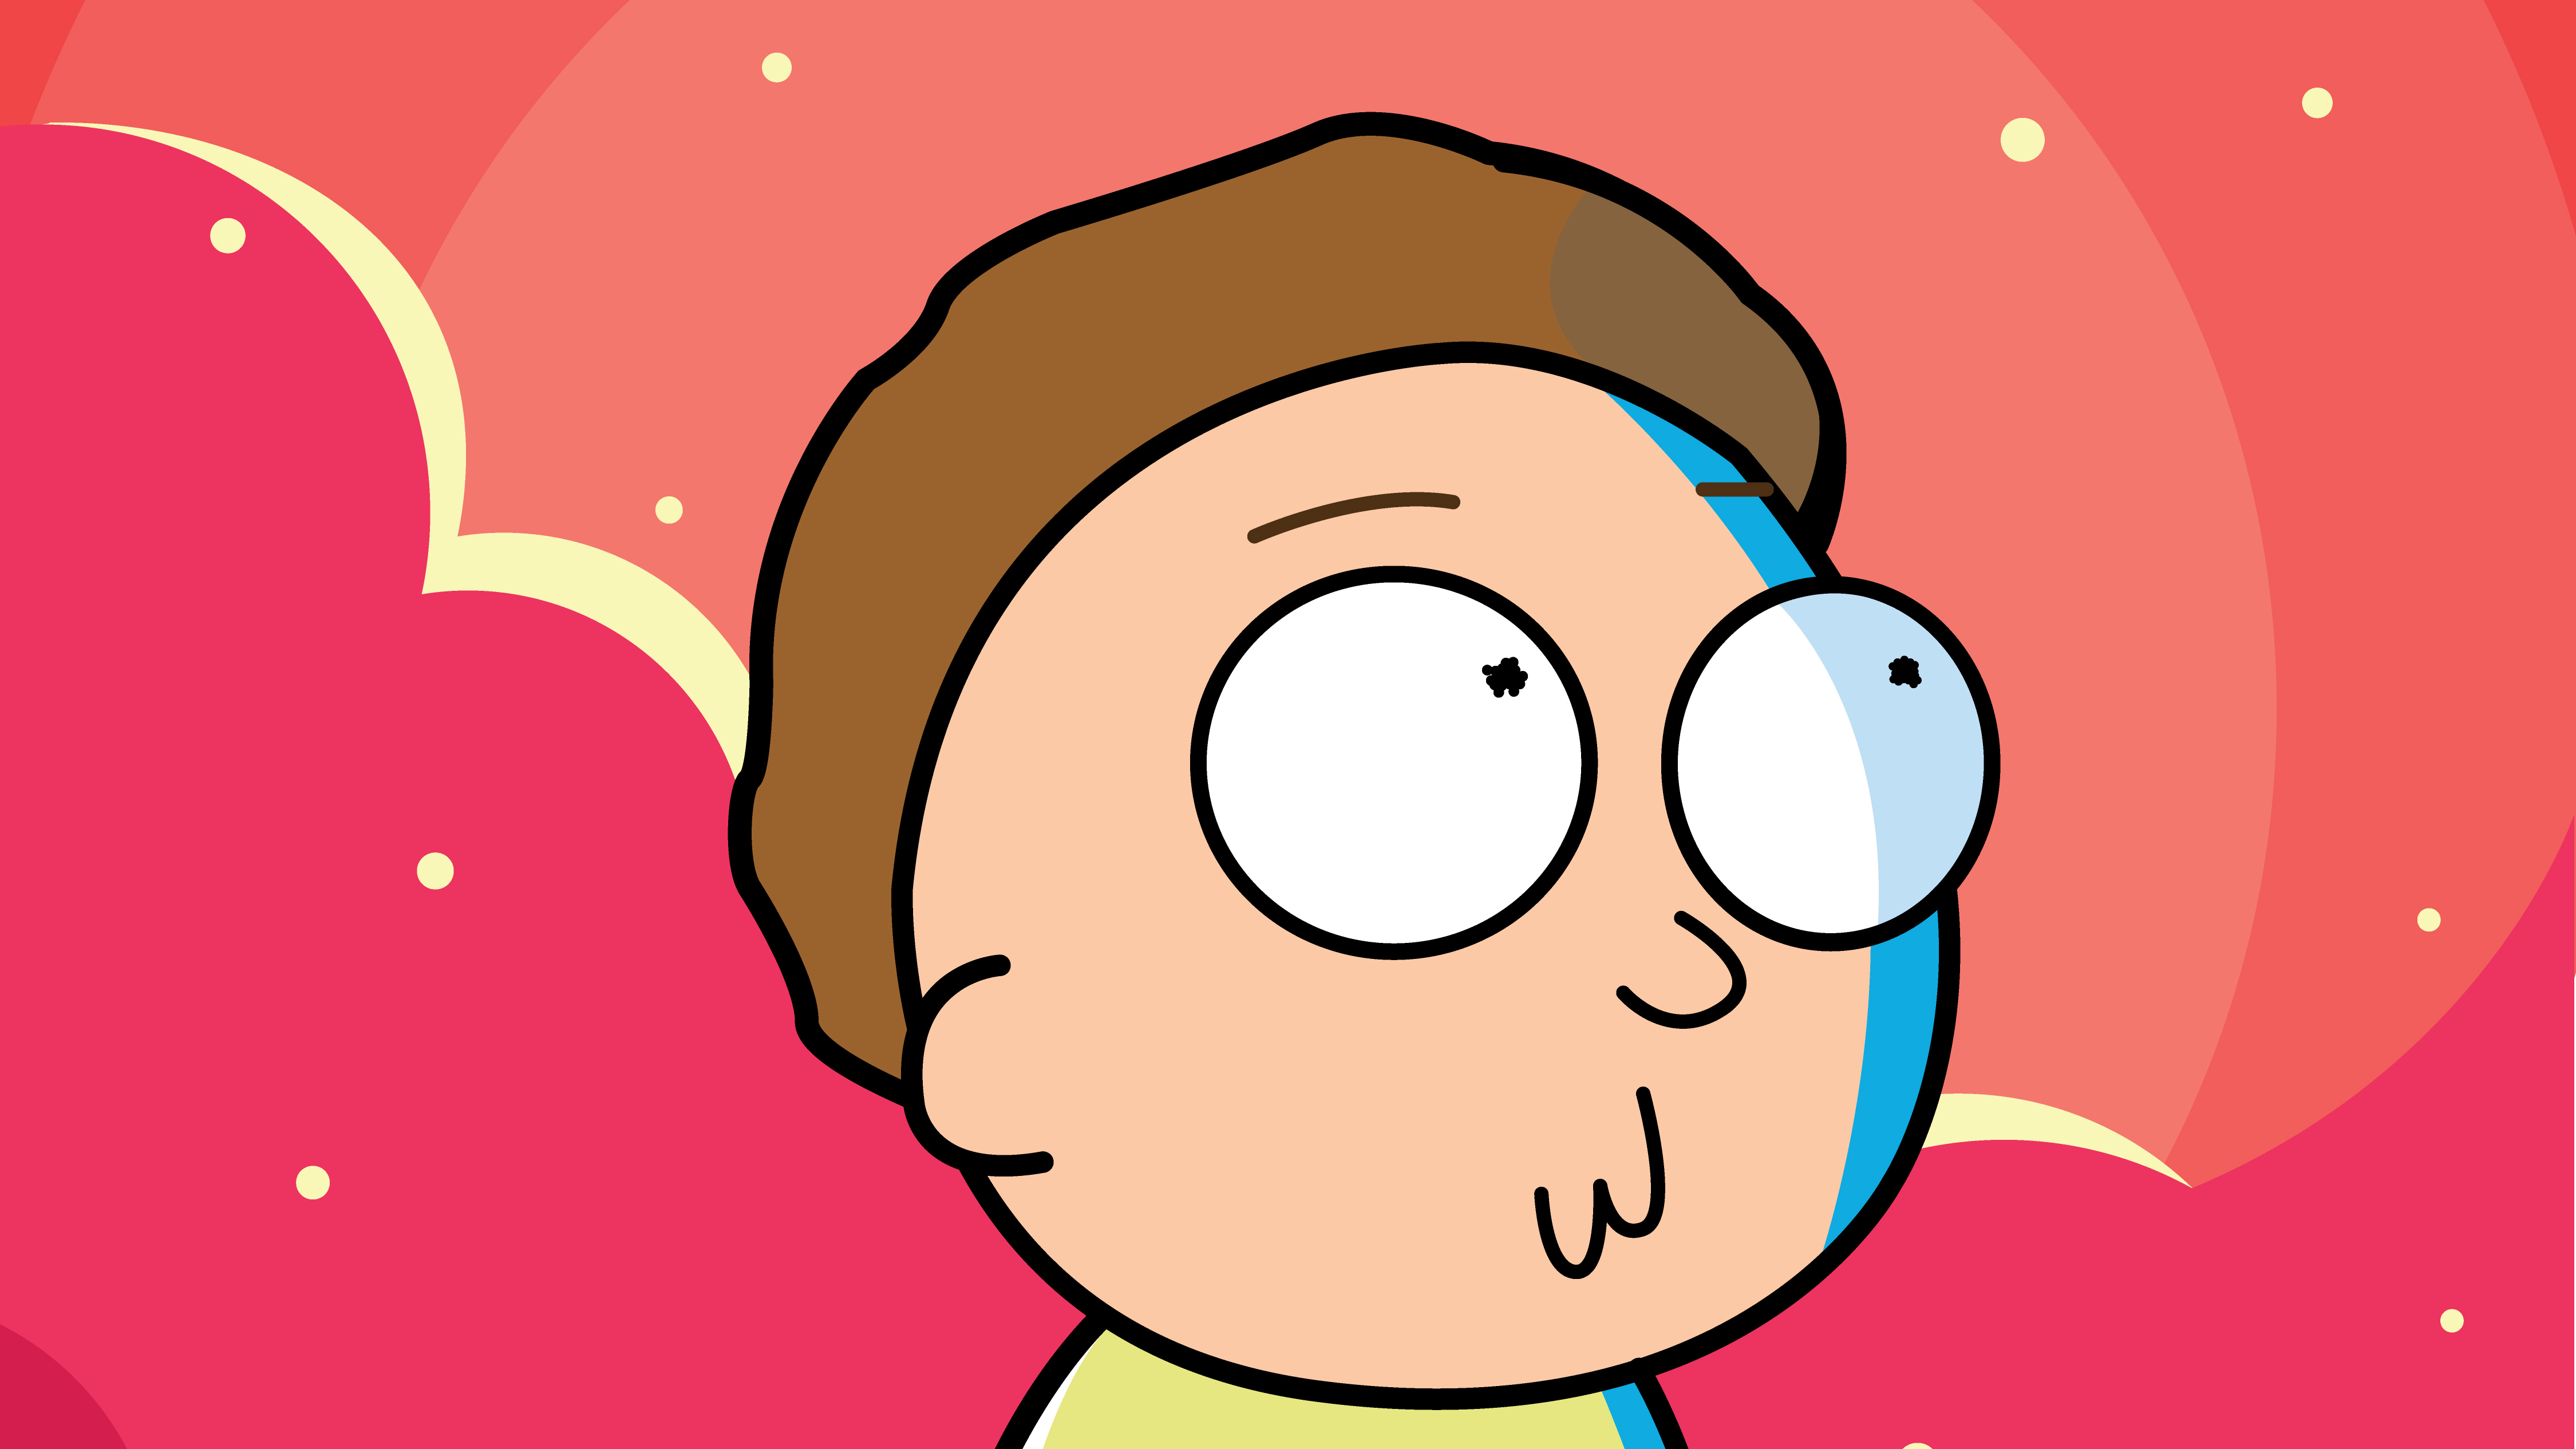 rick and morty, tv show, morty smith 4K Ultra